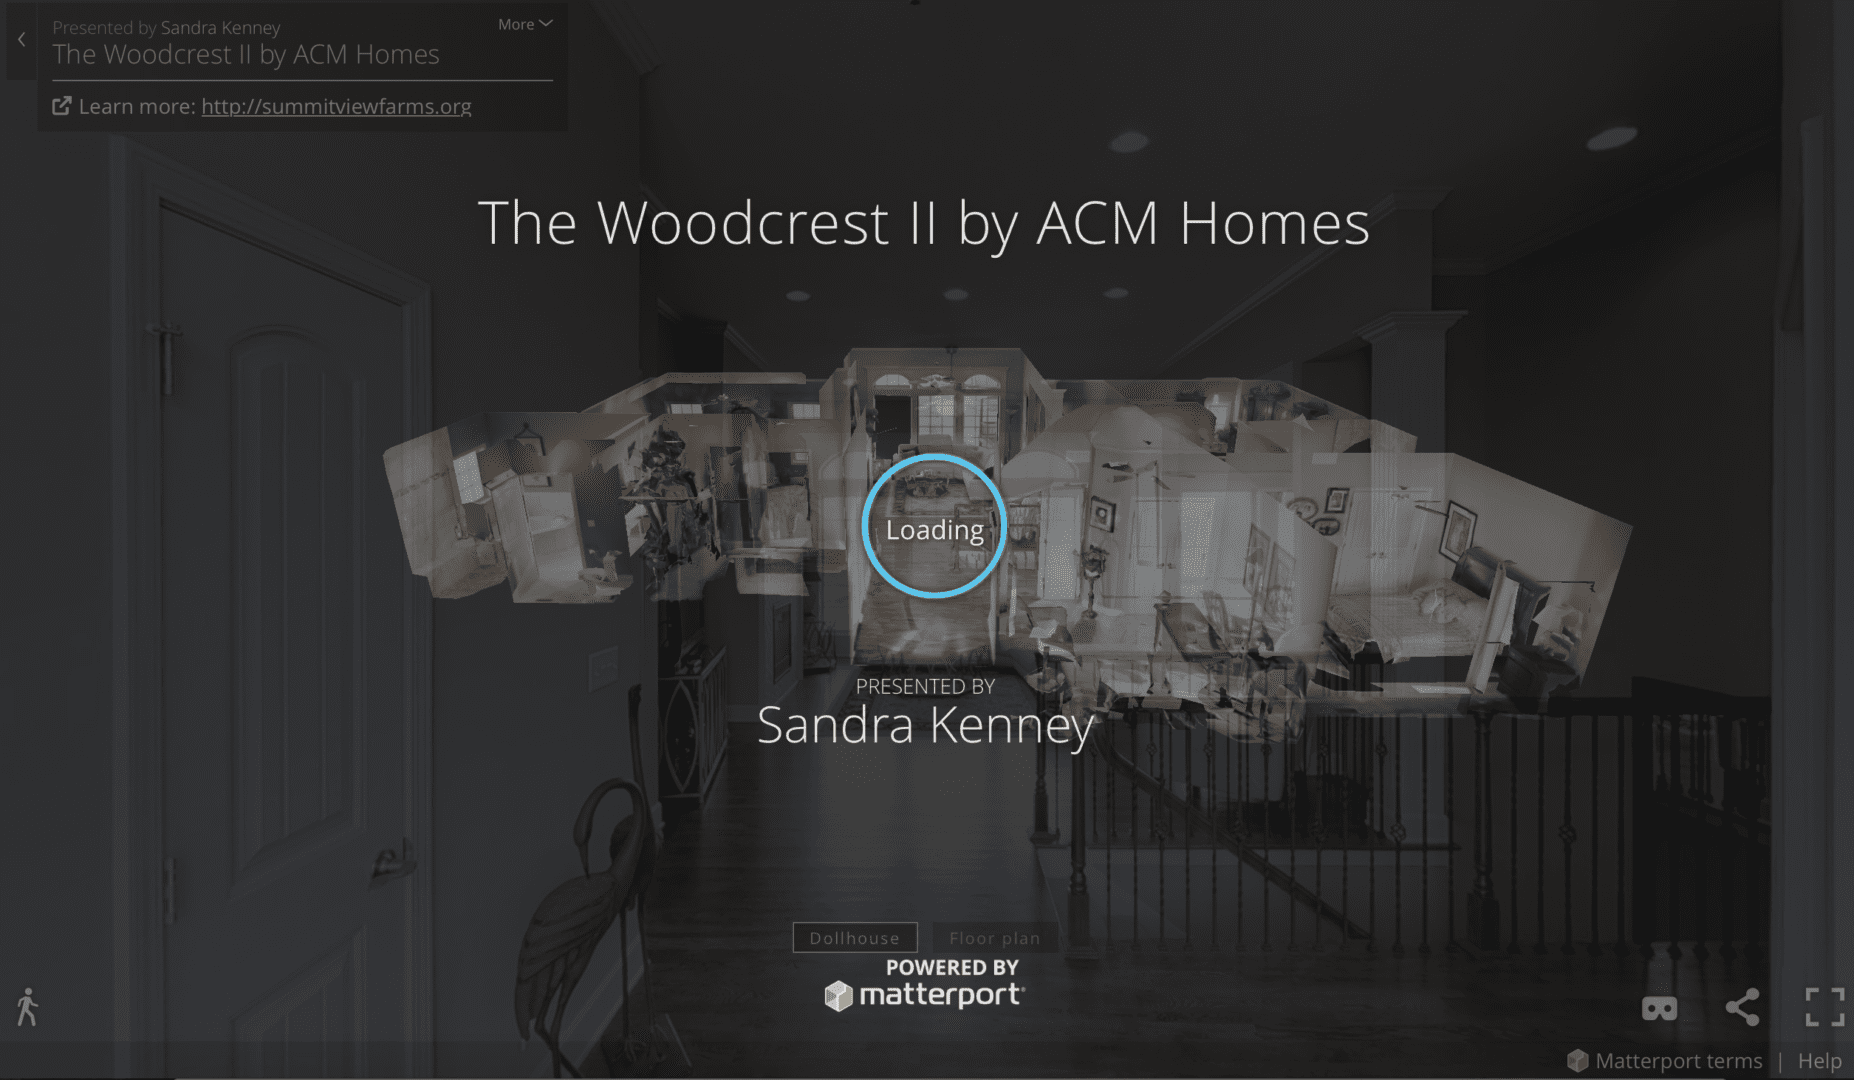 The woodest by acm homes.